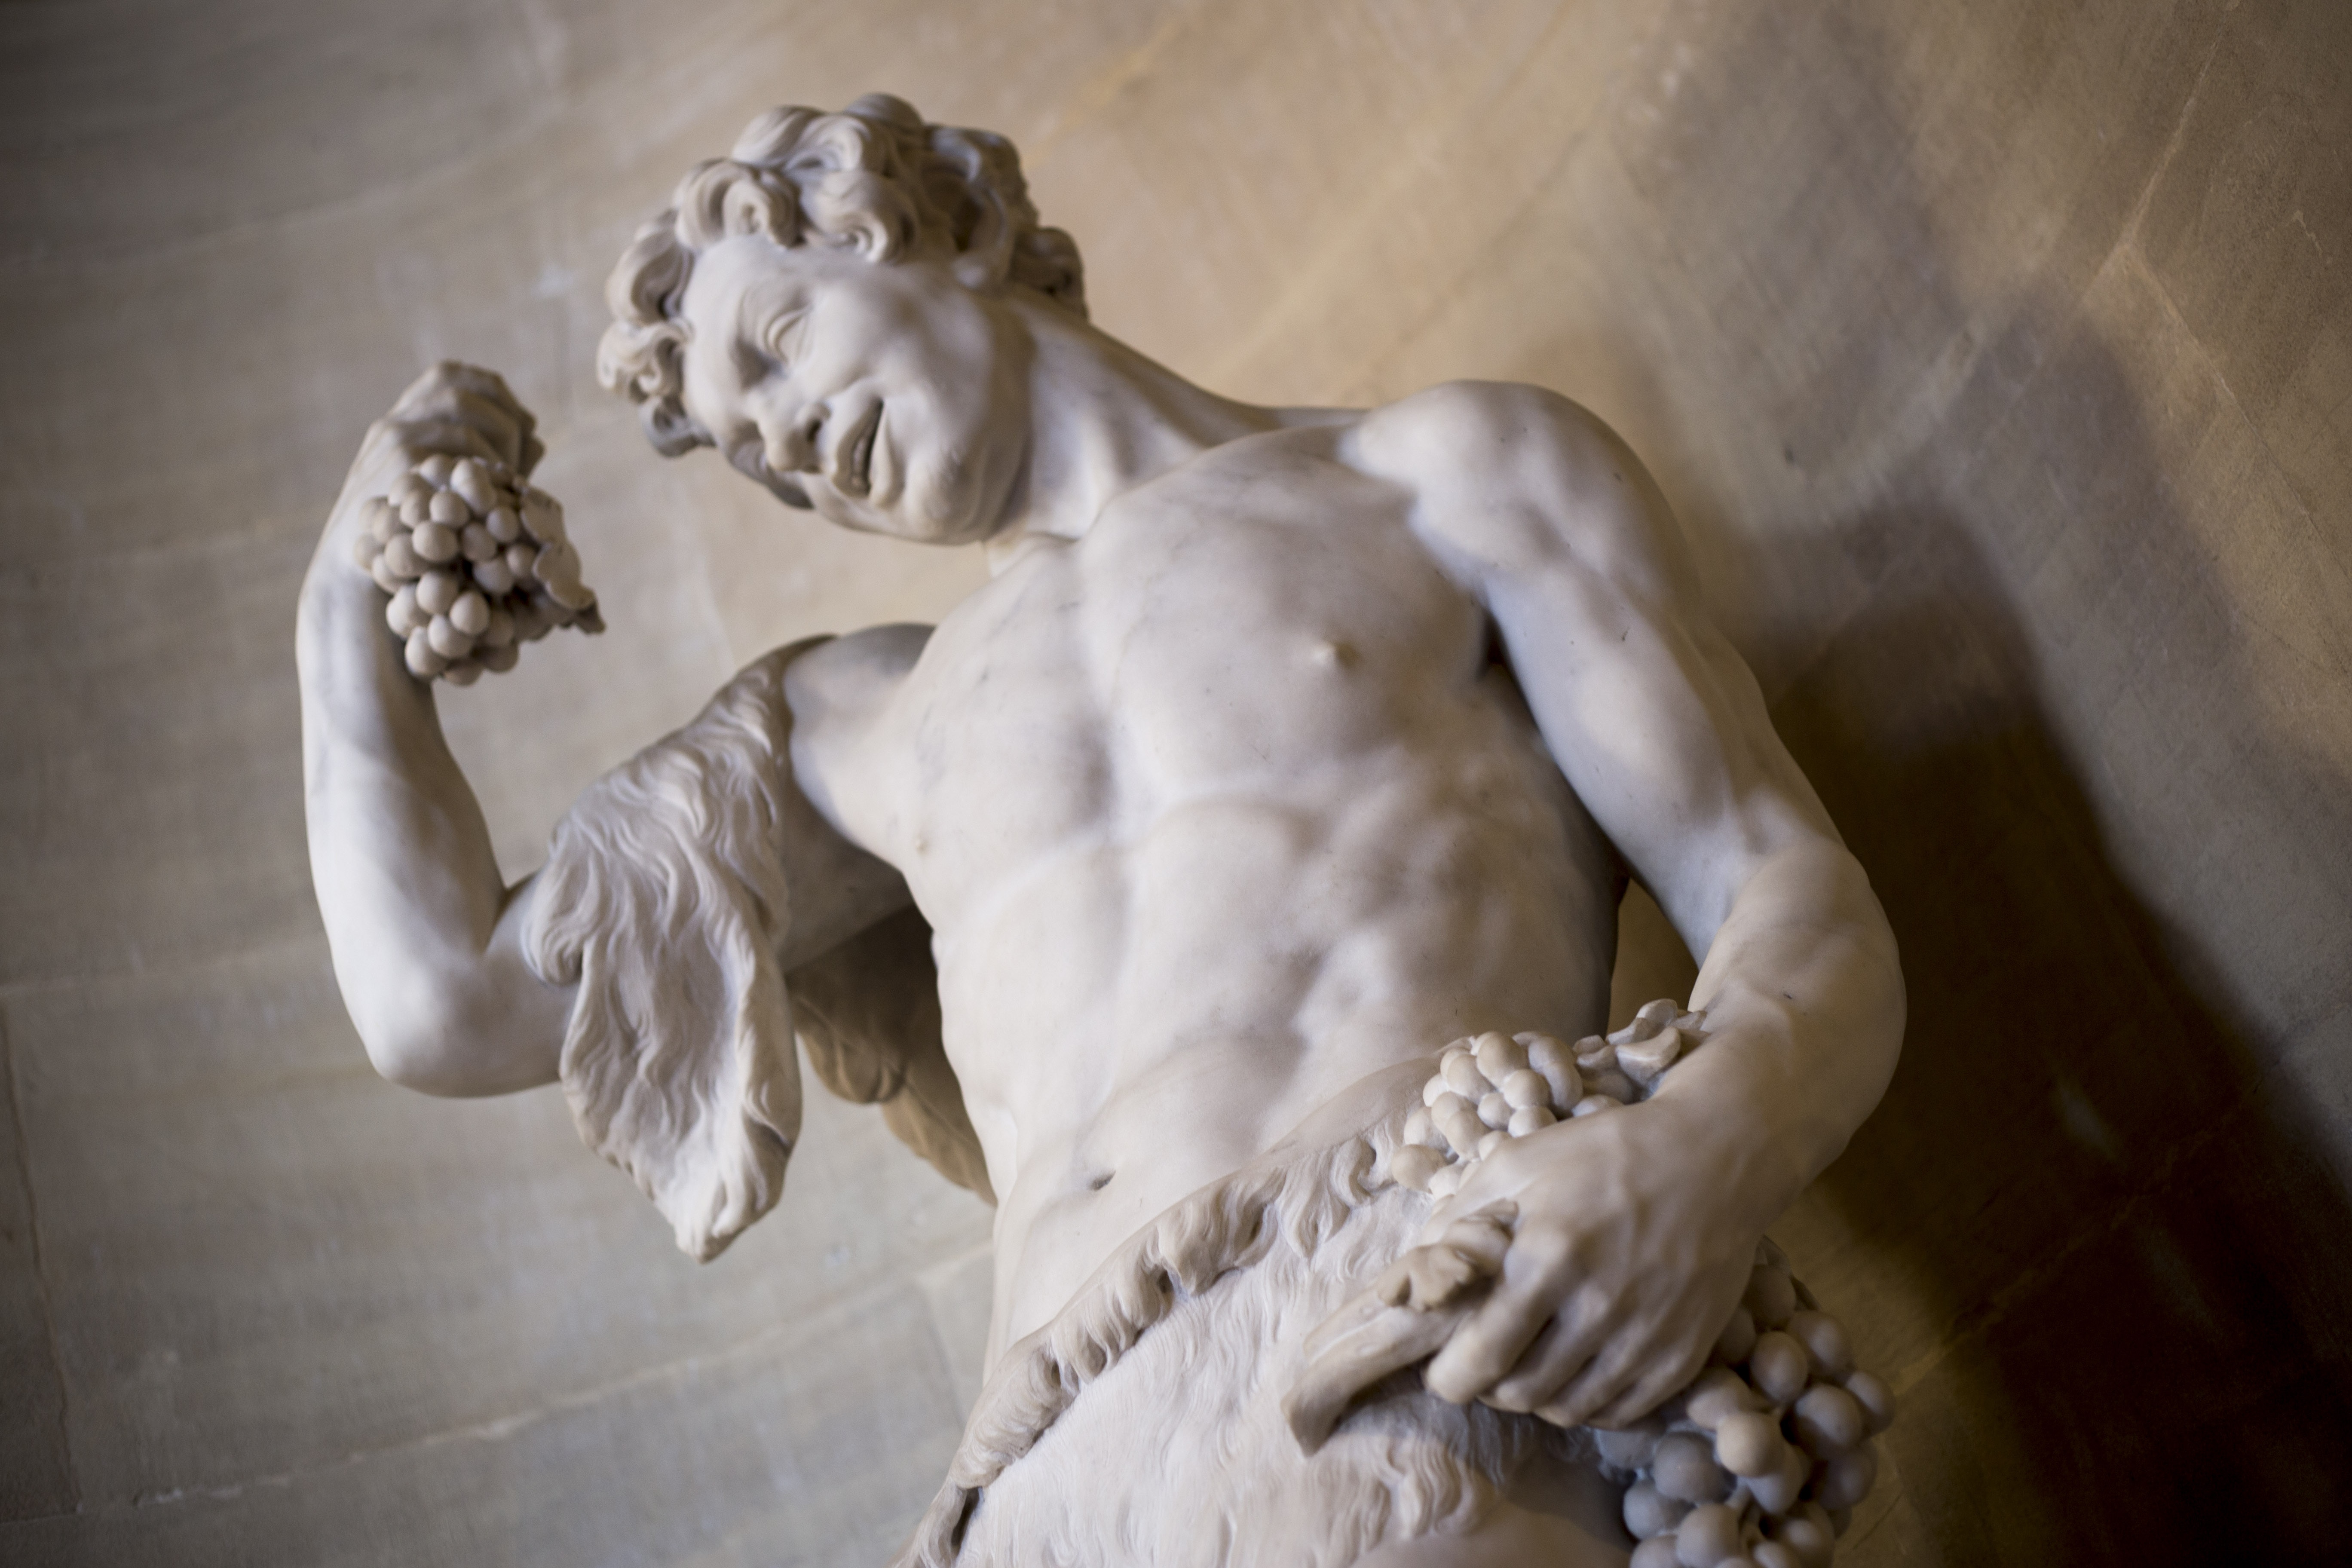 human statue holding grapes